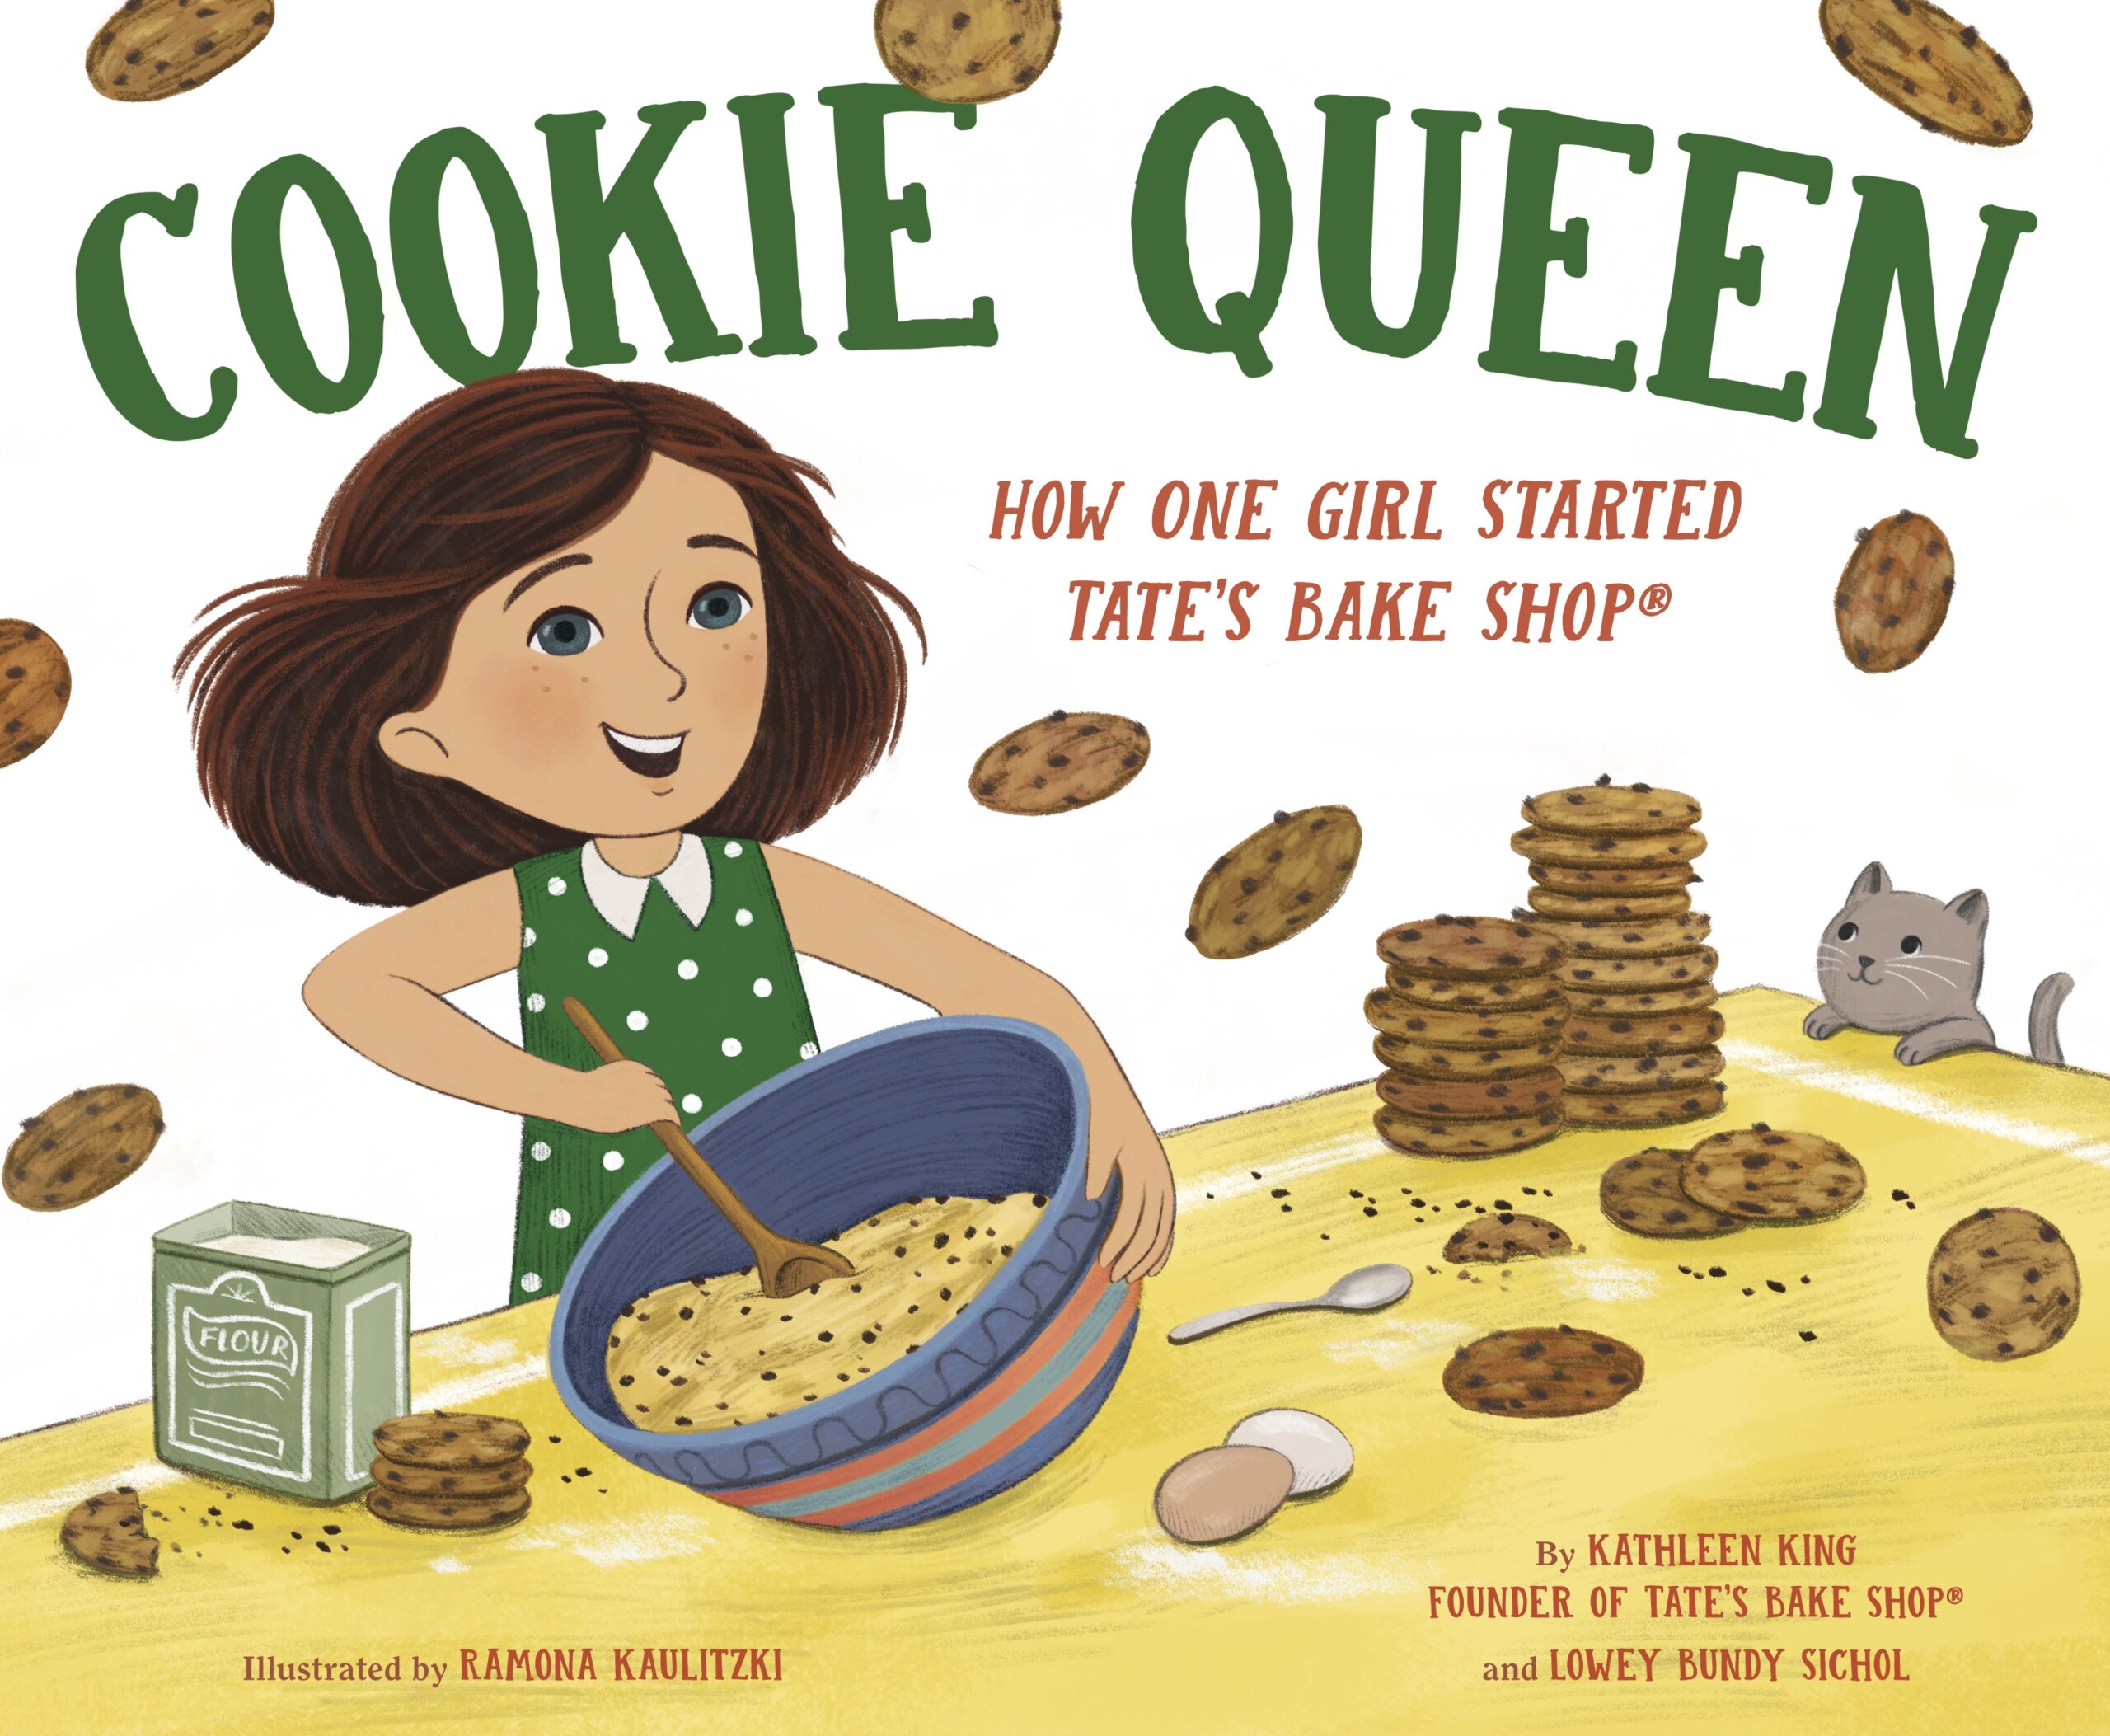 Kathleen King's story is being told via "Cookie Queen," her children's book for 4-8 year-olds.